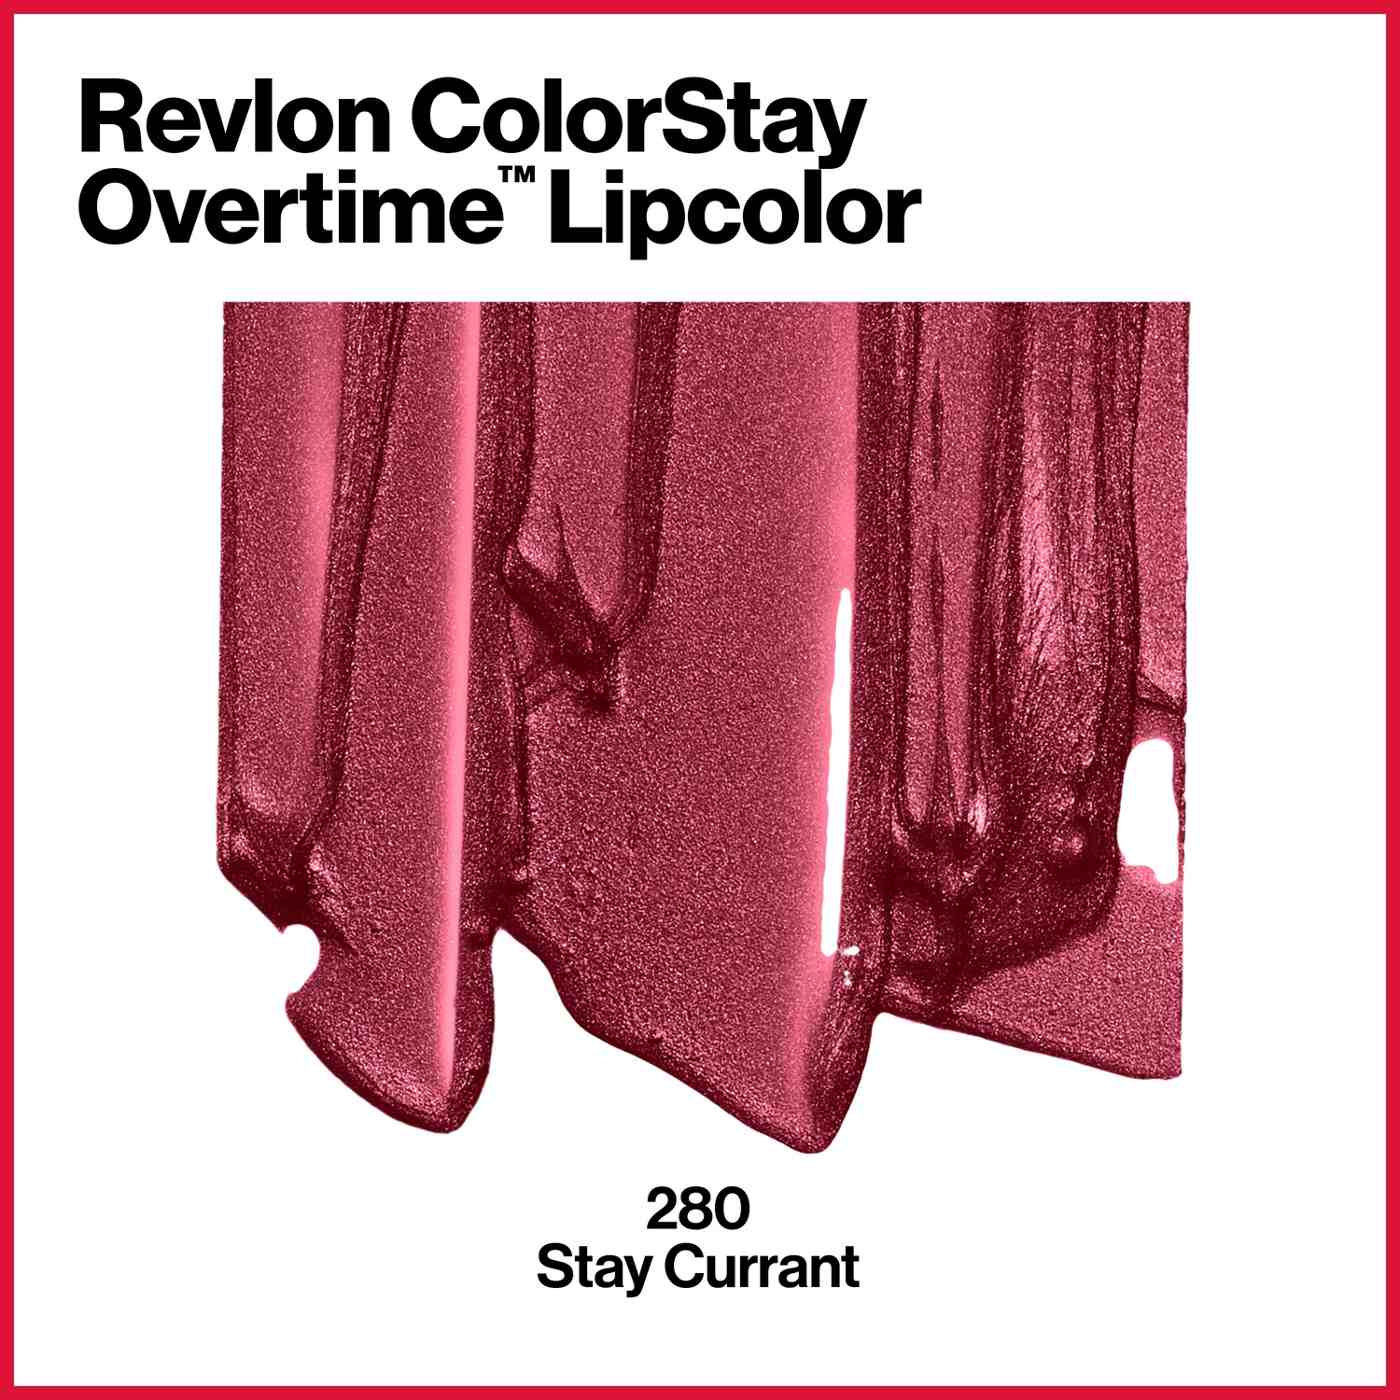 Revlon ColorStay Overtime Lipcolor, Long Wearing Liquid Lipstick, 280 Stay Currant; image 7 of 7